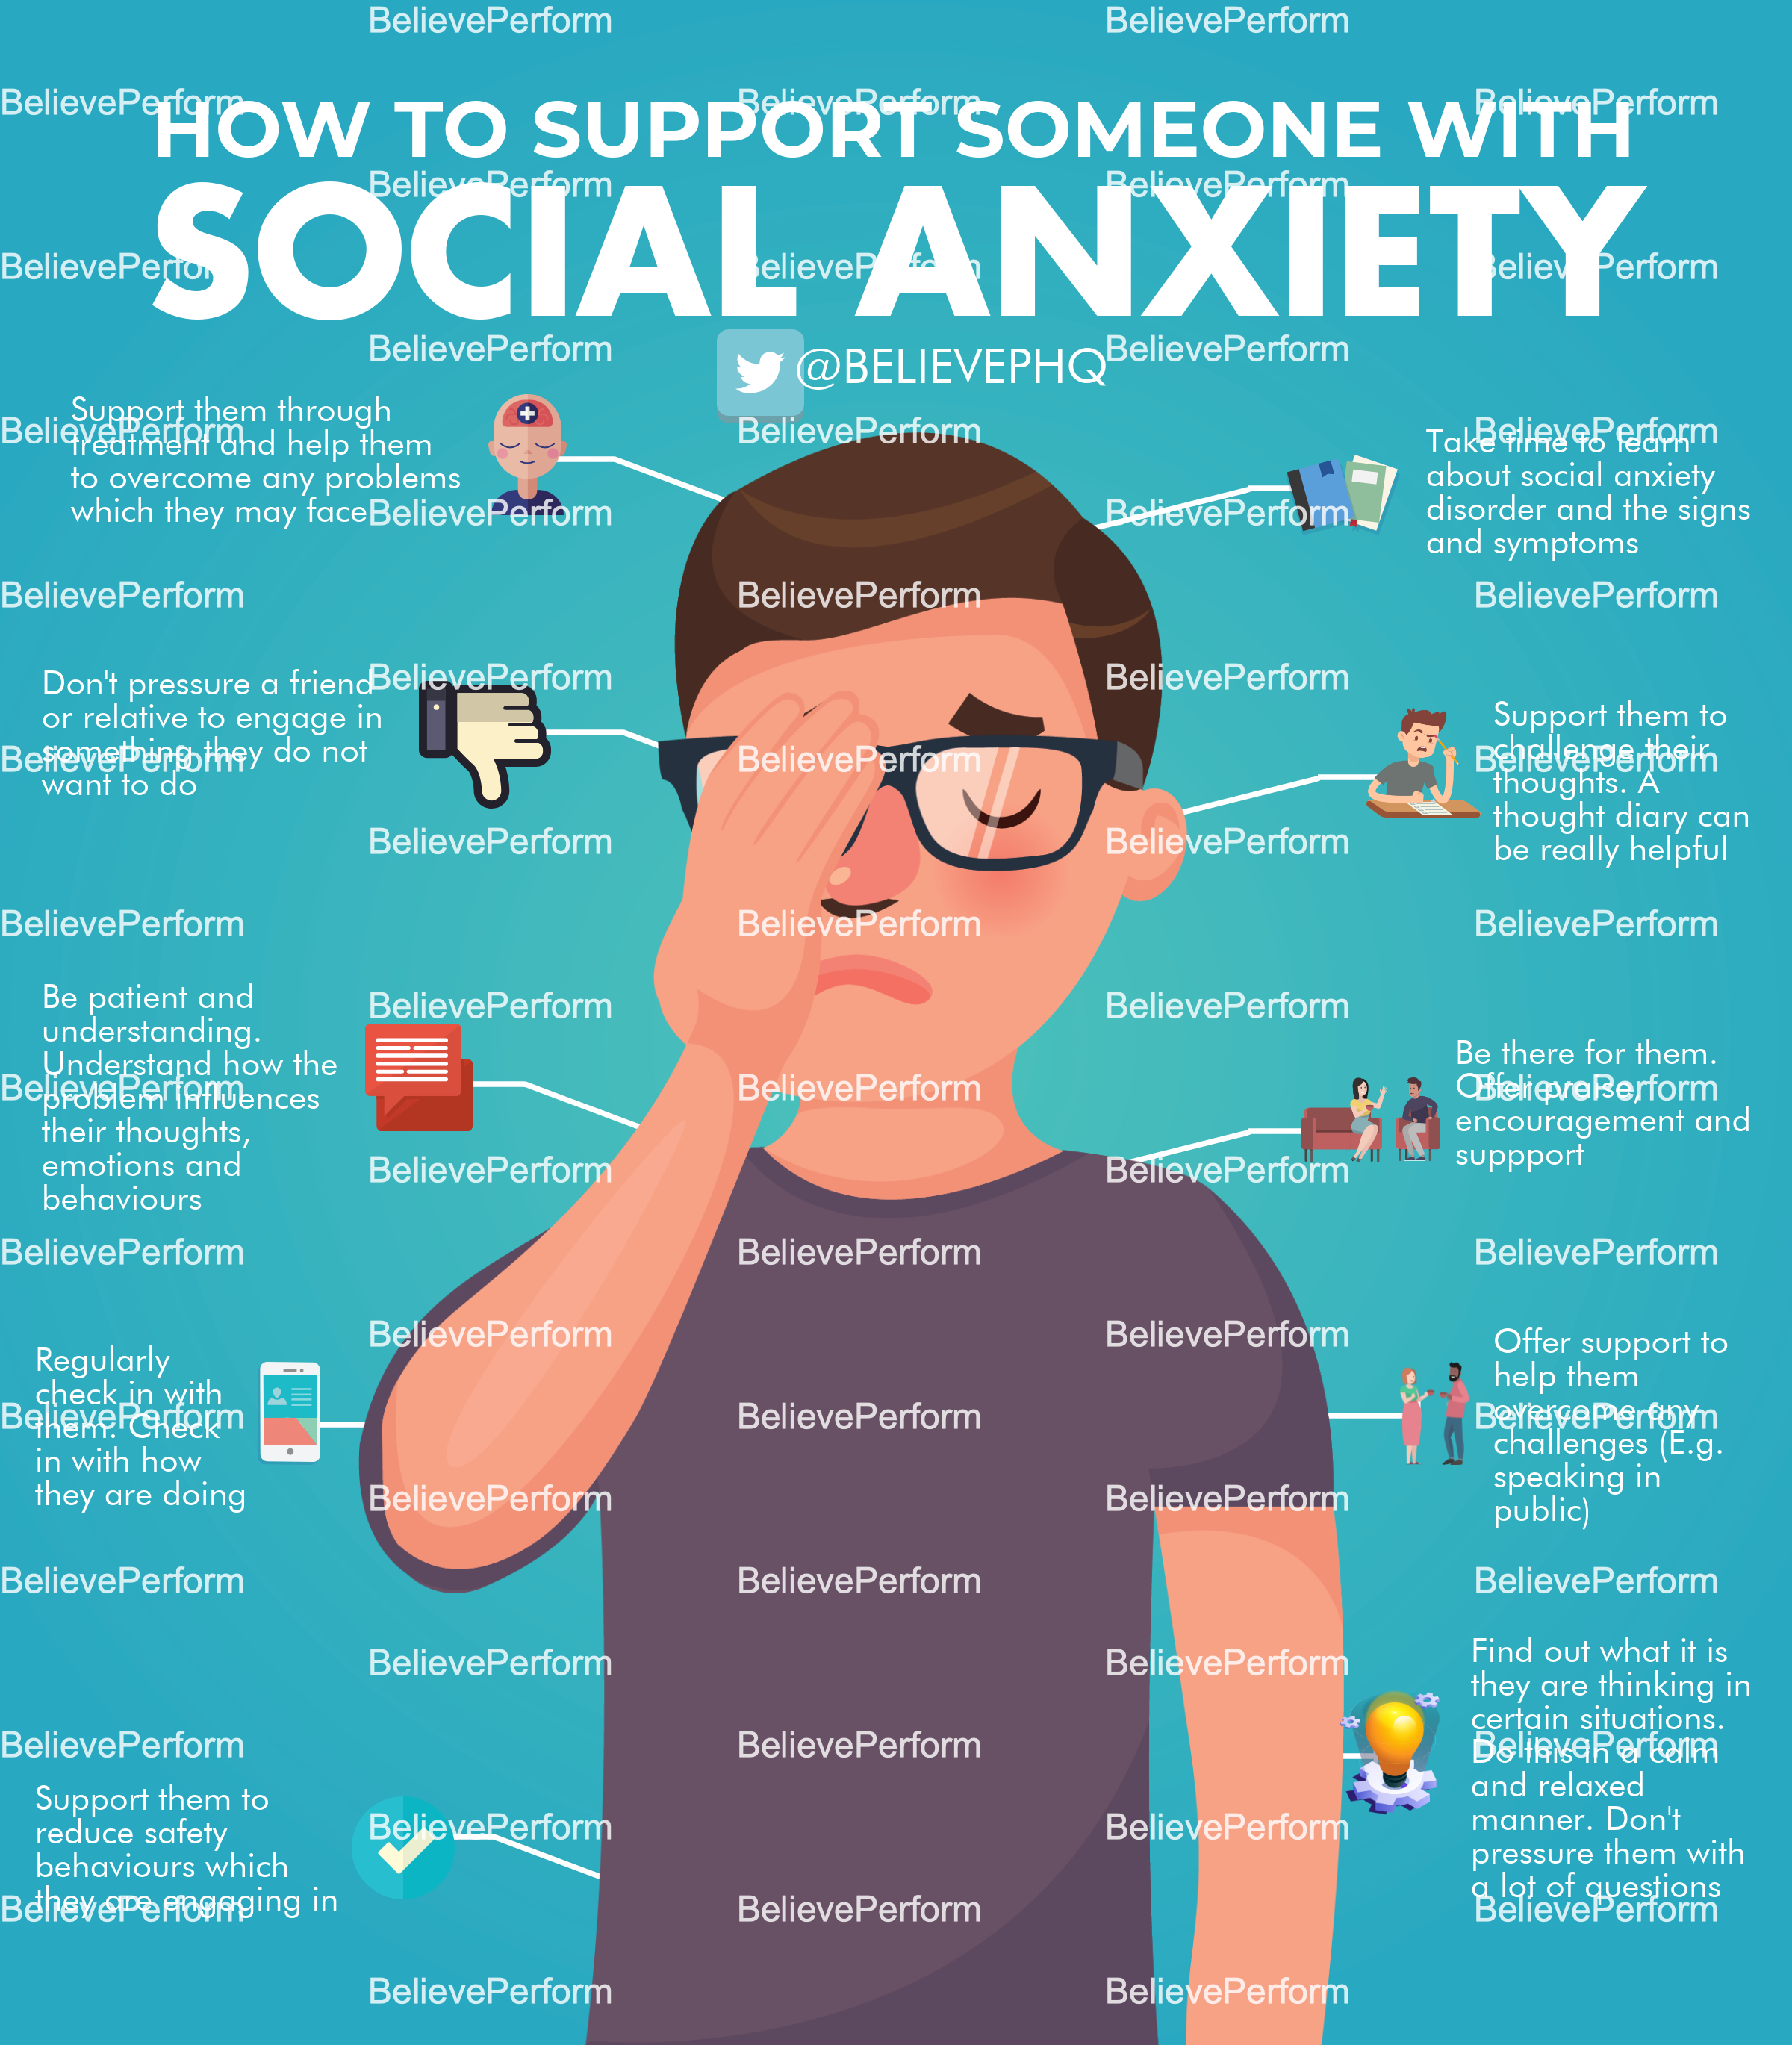 Does Social Anxiety Make You Scared of People?